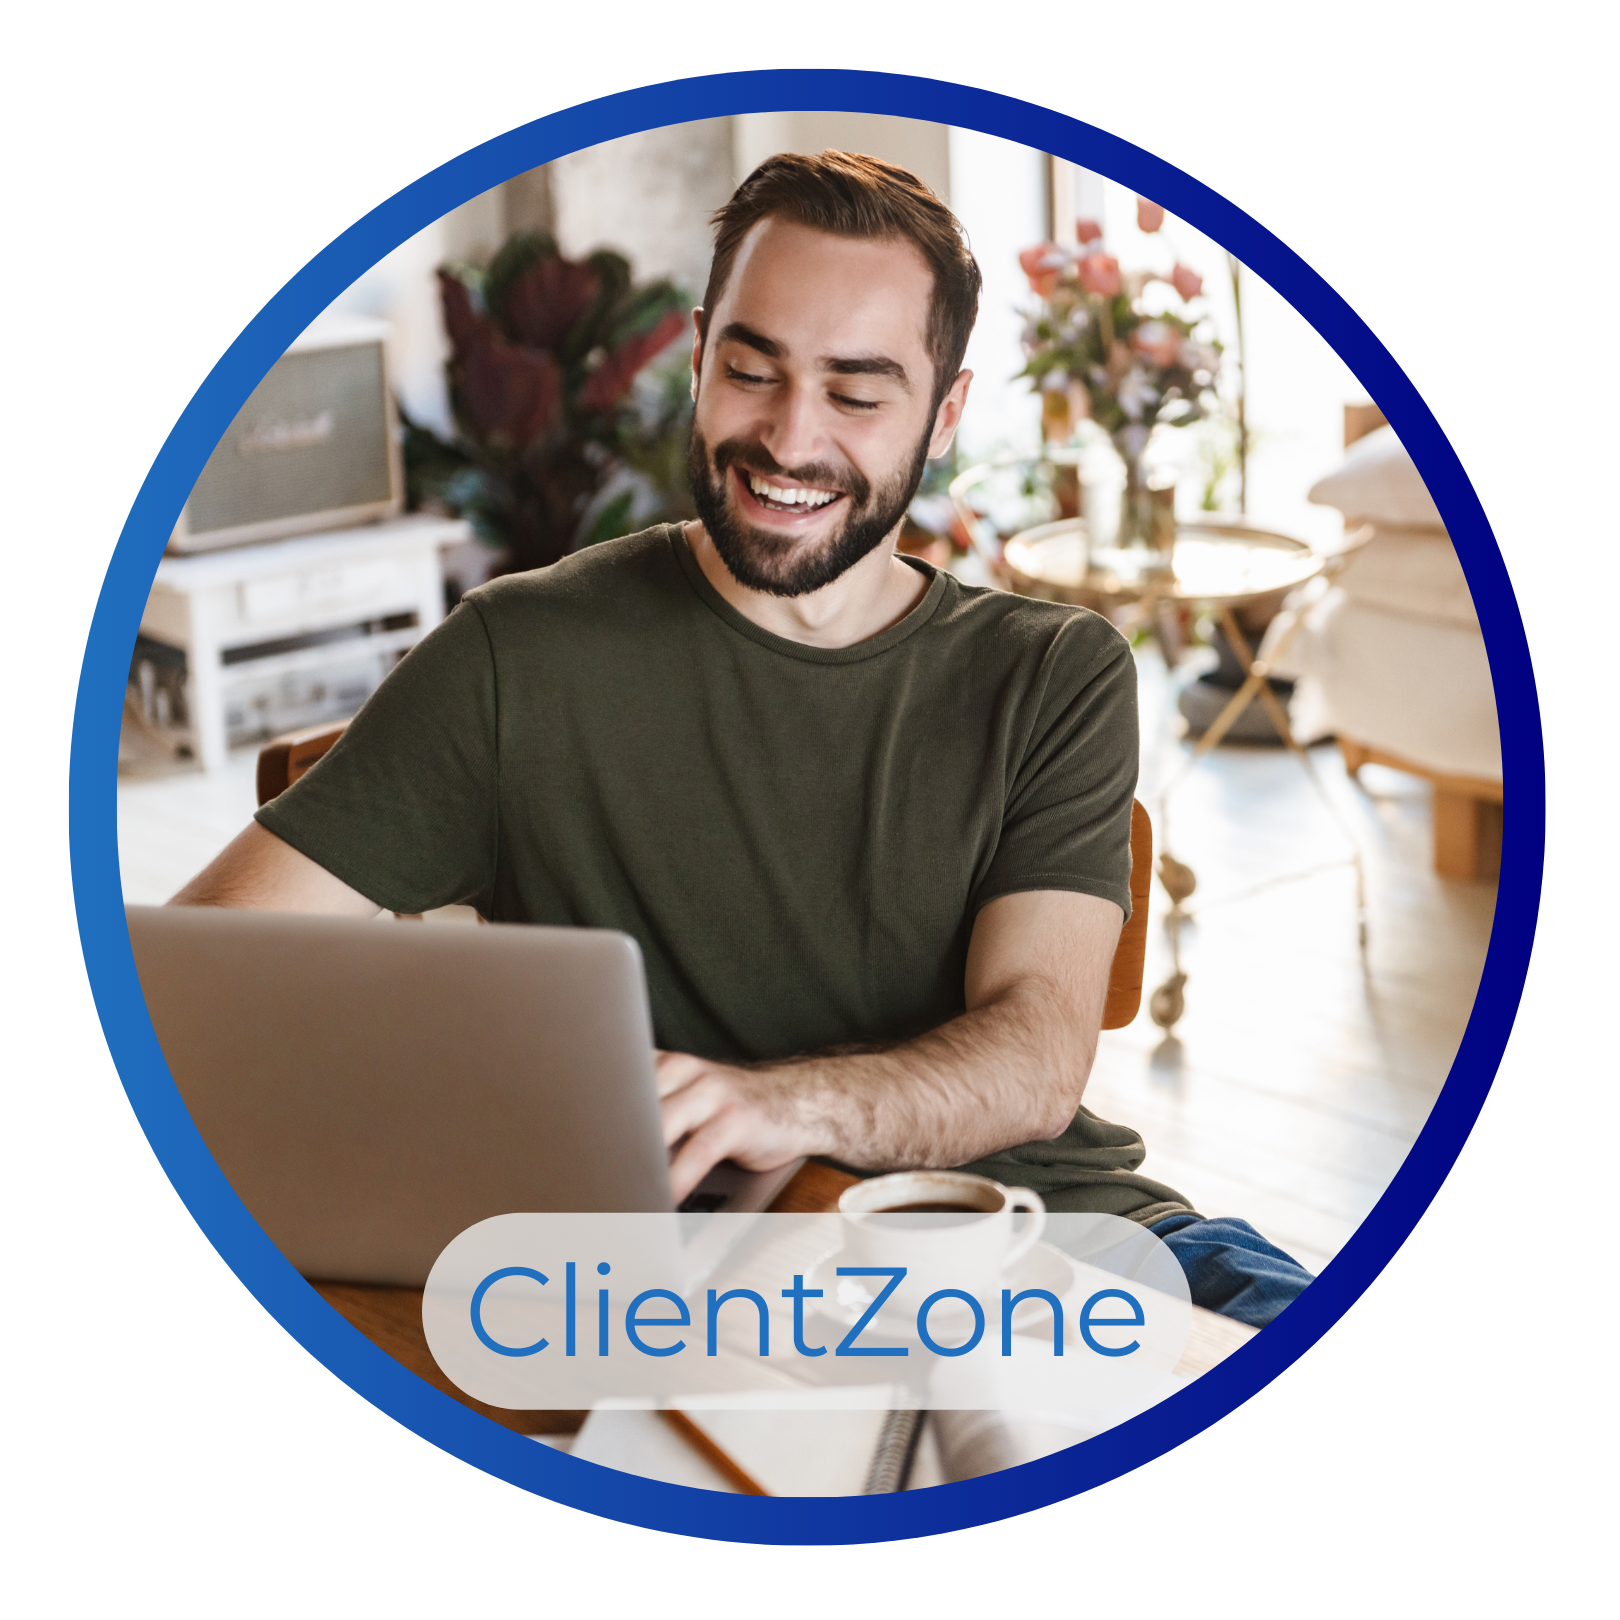 Click here to access ClientZone by Huge TNS